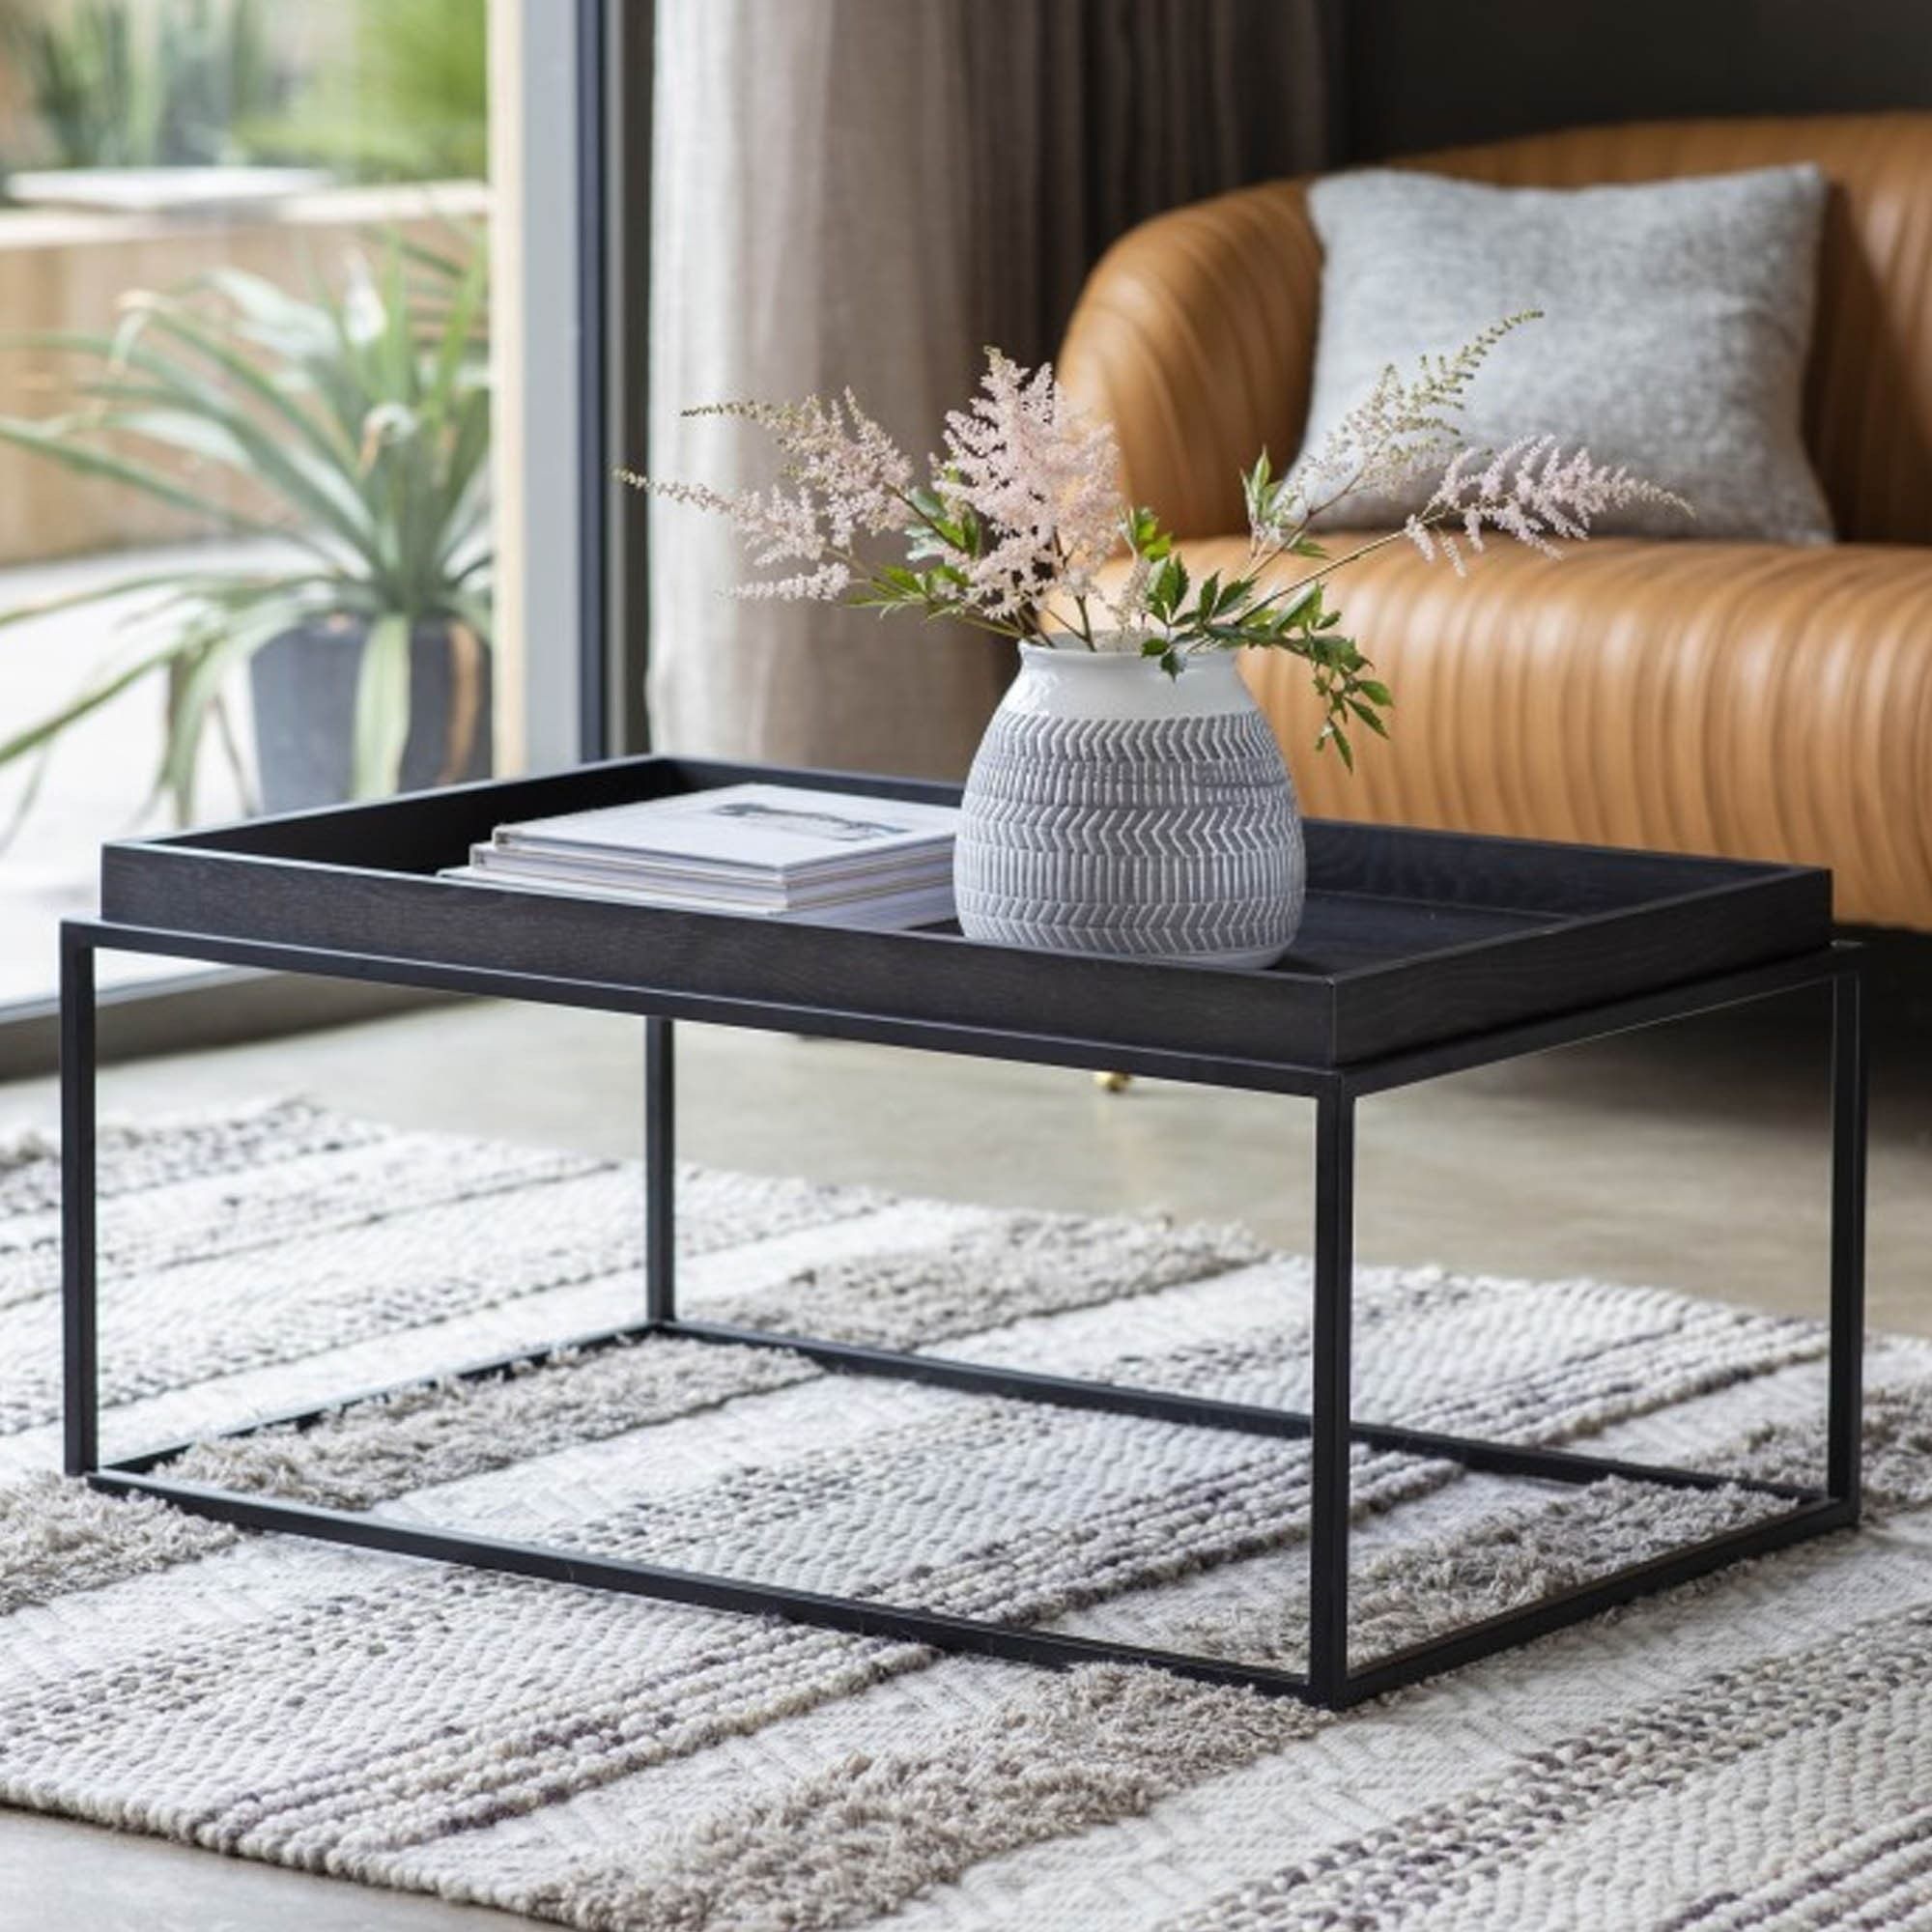 Forden Tray Coffee Table Black | Modern Coffee Table | Industrial With Coffee Tables With Trays (Gallery 13 of 20)